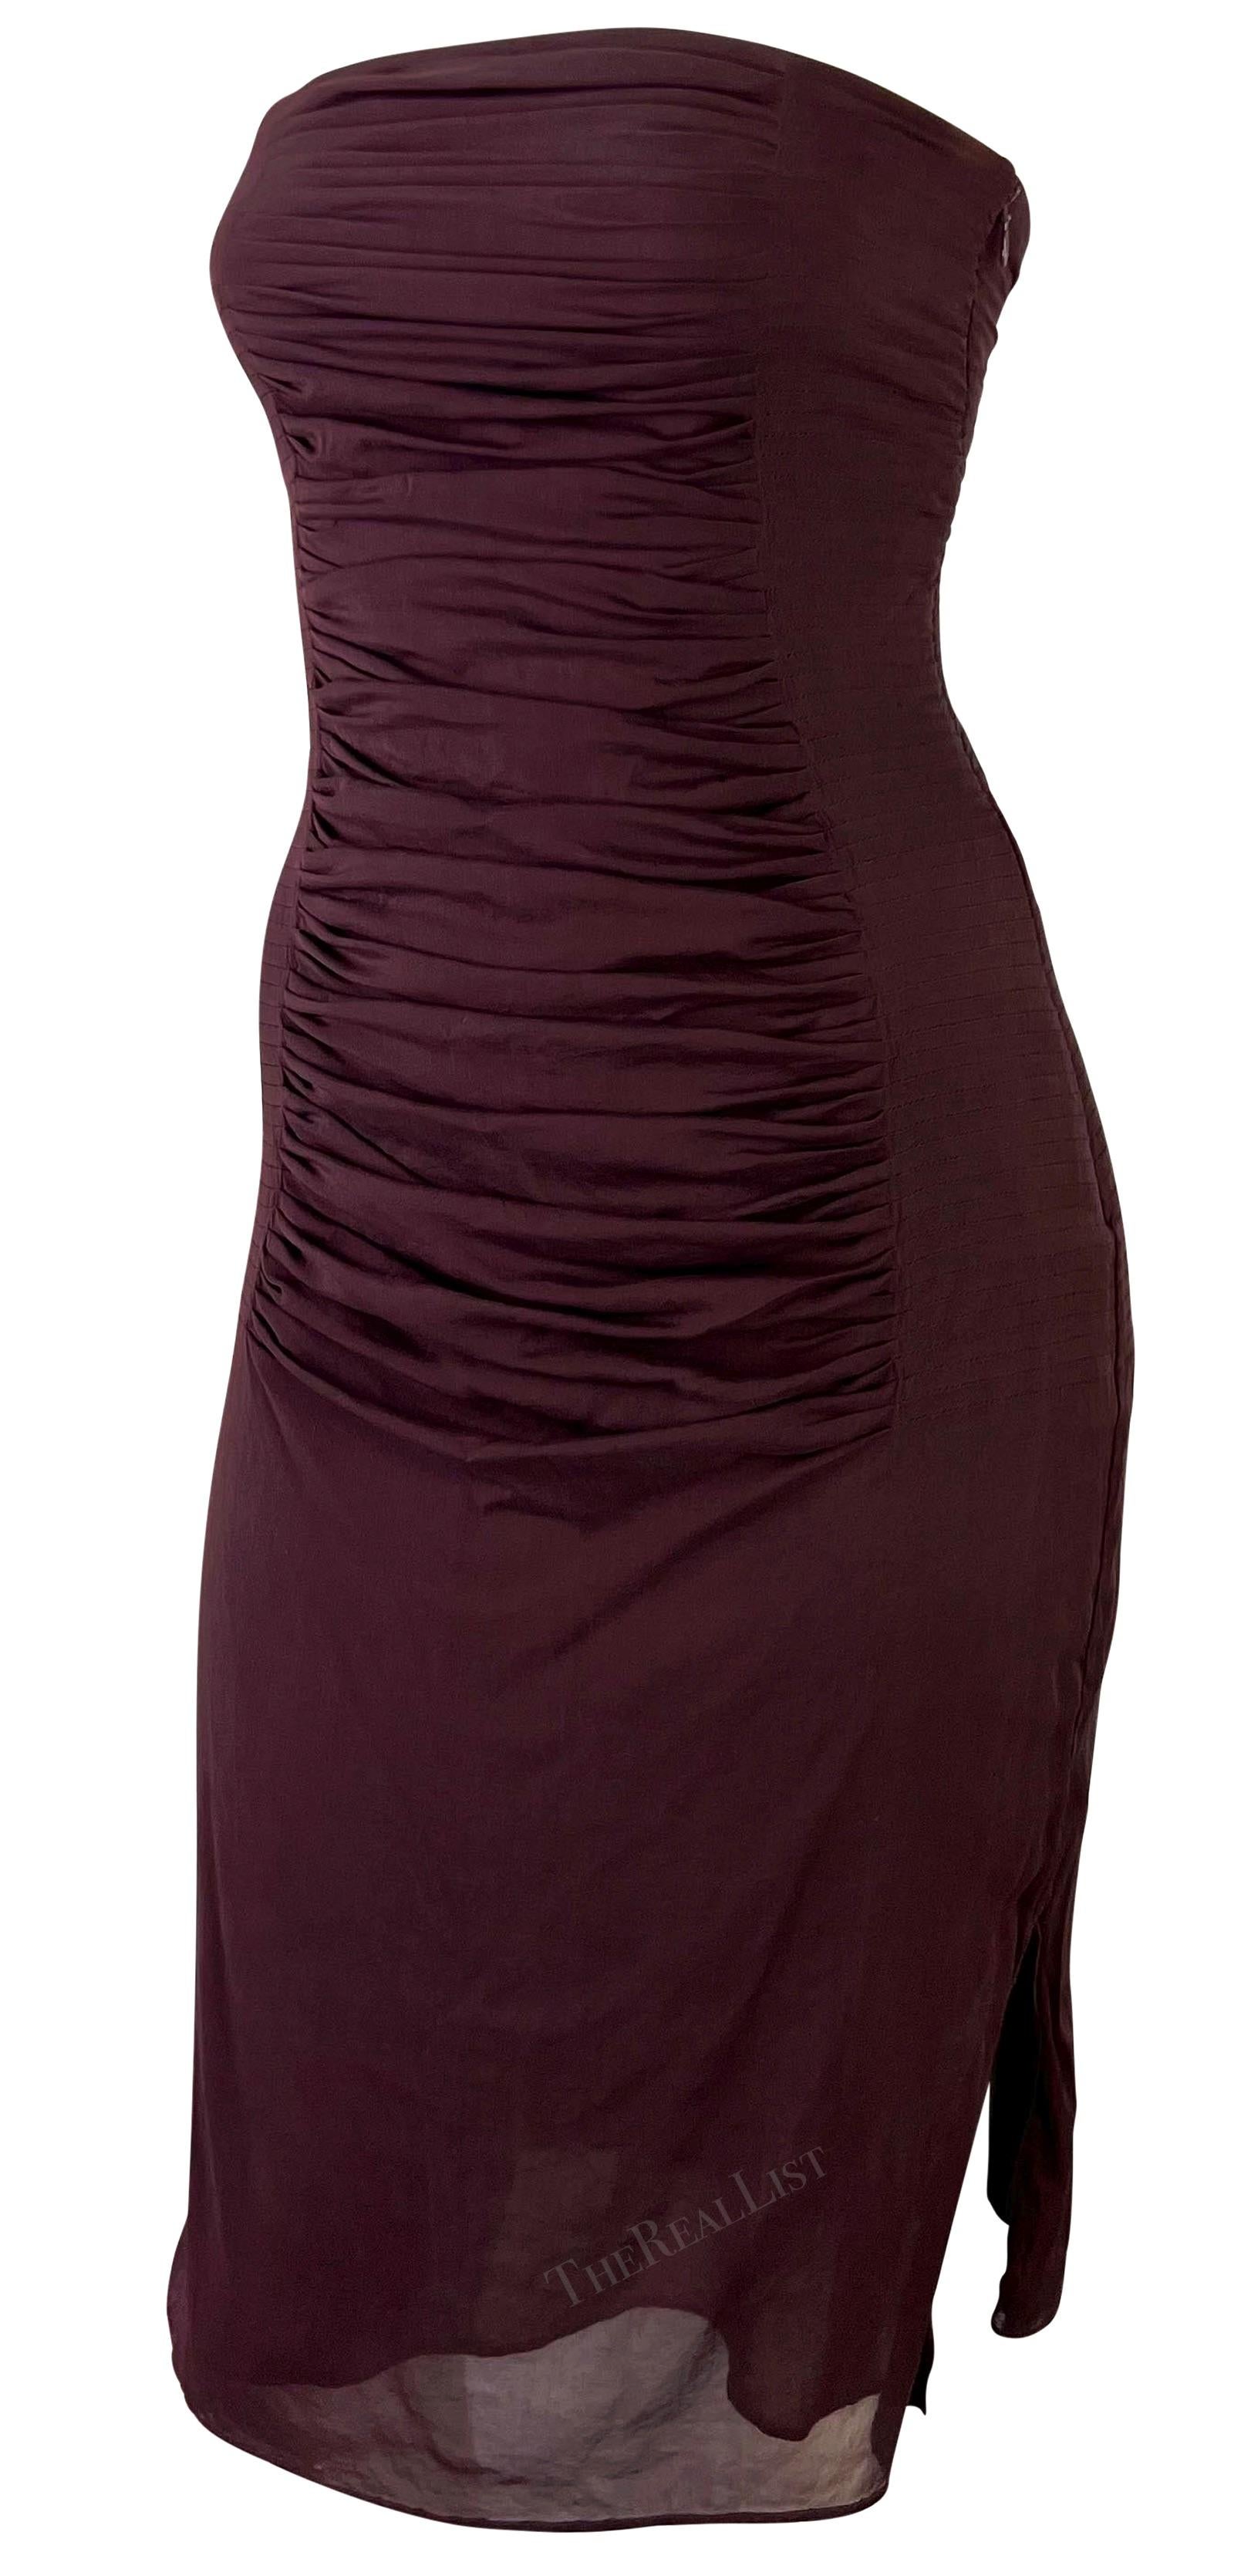 S/S 2001 Yves Saint Laurent by Tom Ford Sheer Maroon Pleat Strapless Mini Dress In Excellent Condition For Sale In West Hollywood, CA